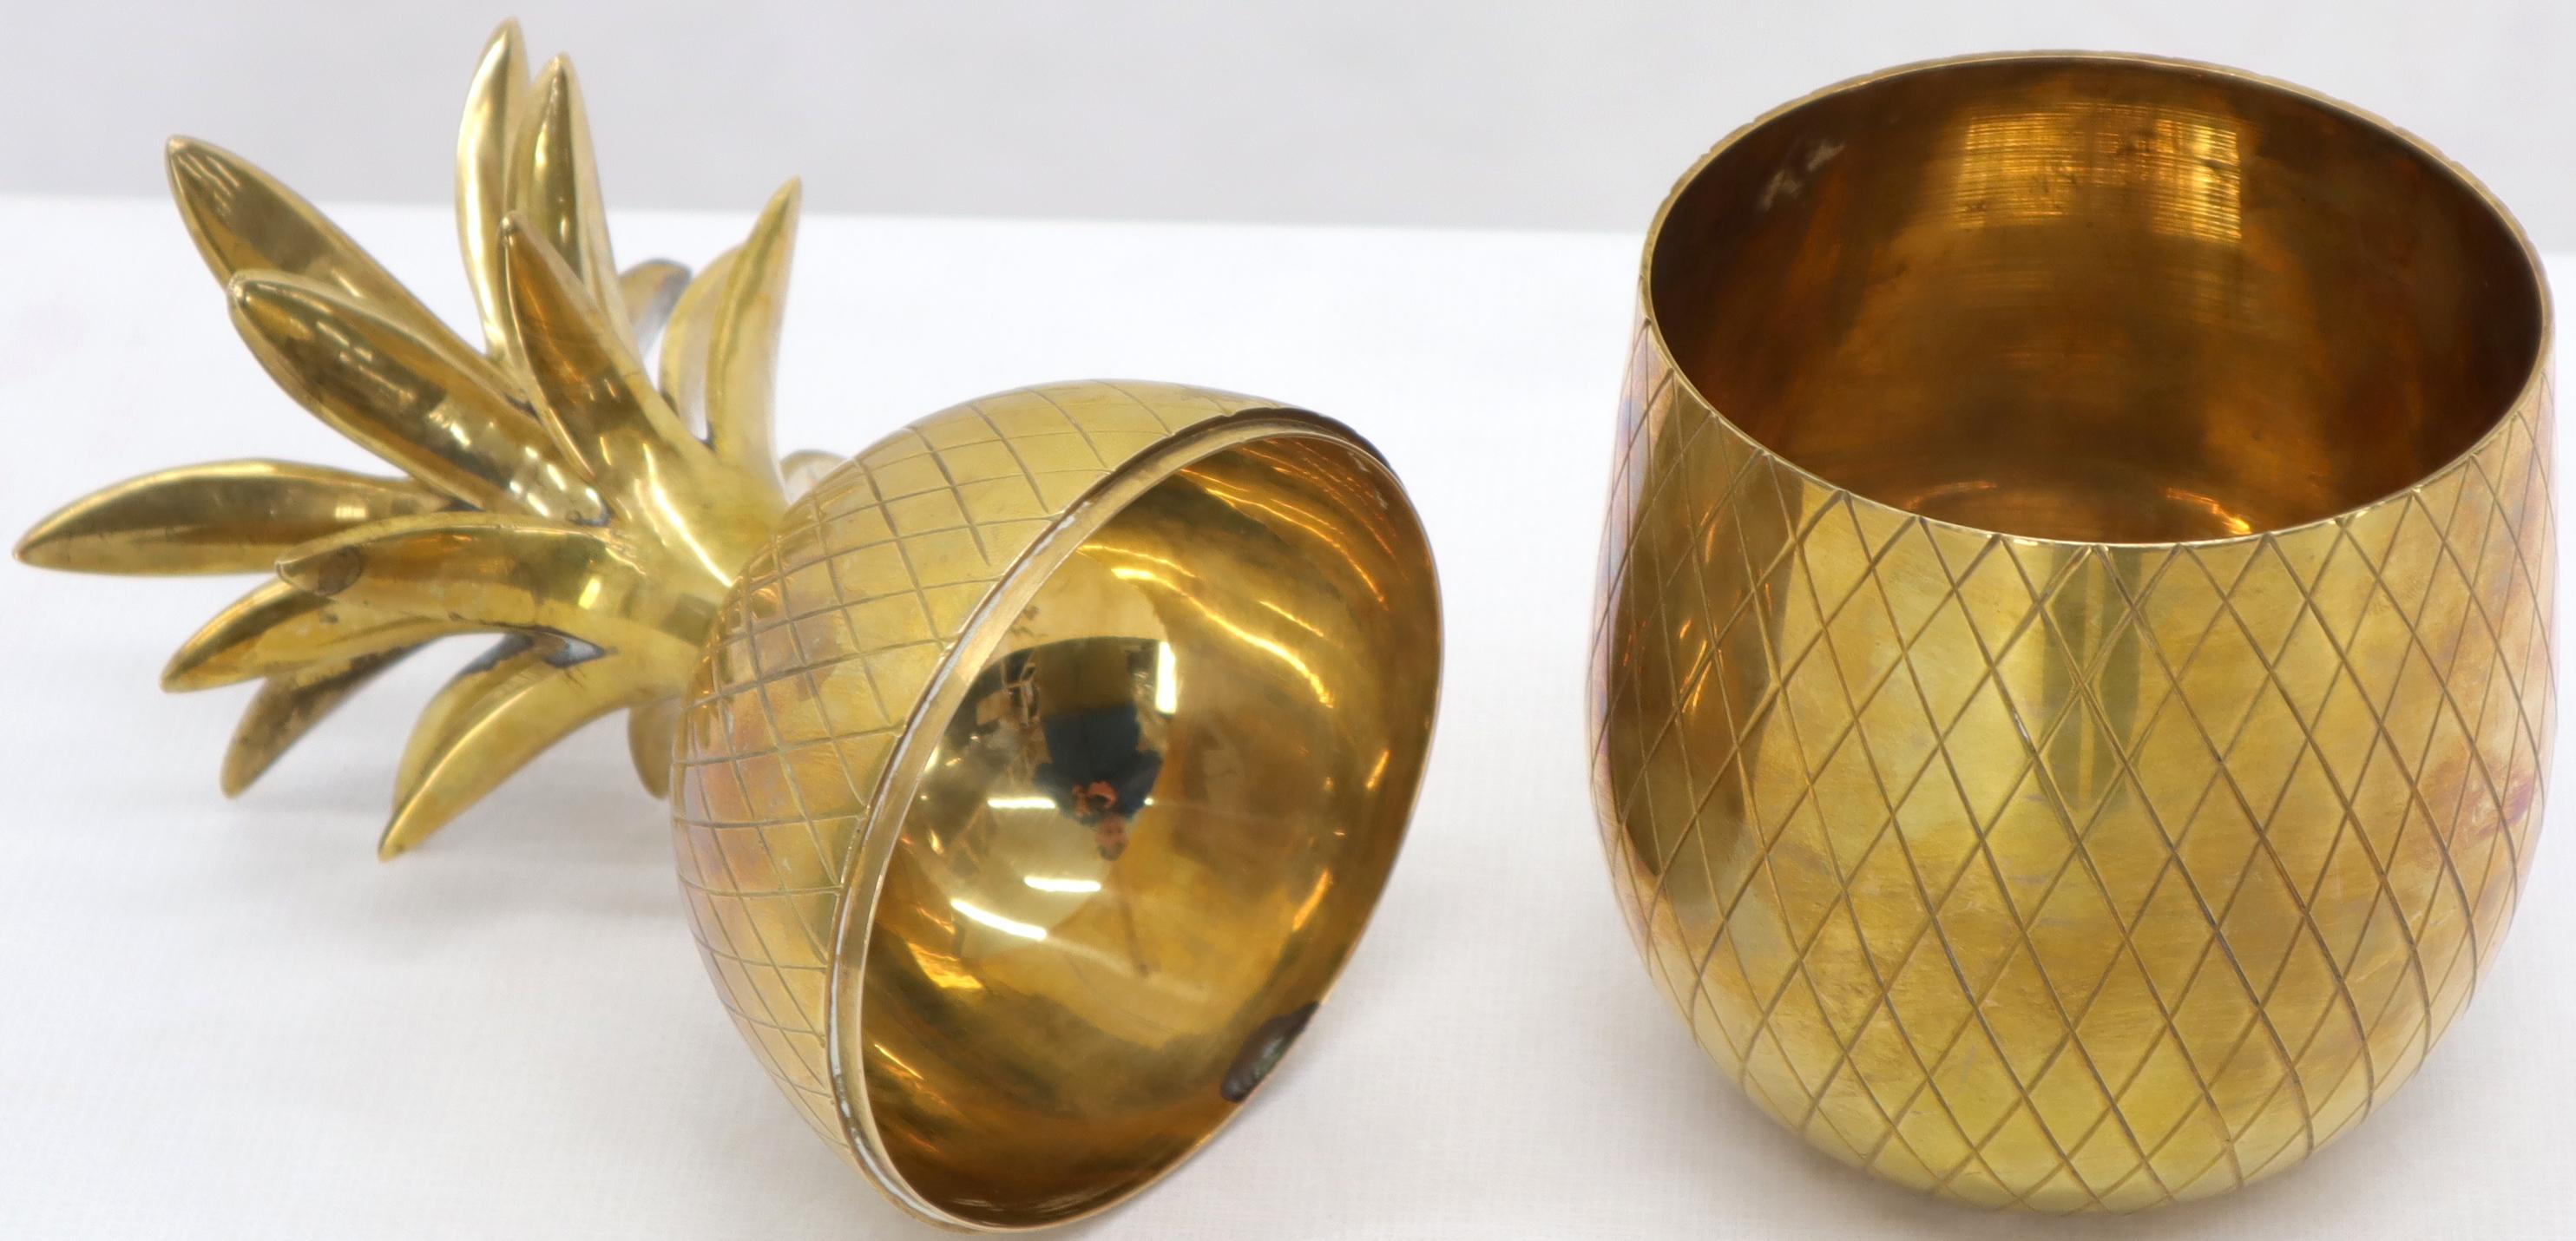 Polished Gold Tone Solid Brass Pineapple Shape Jar with Lid For Sale